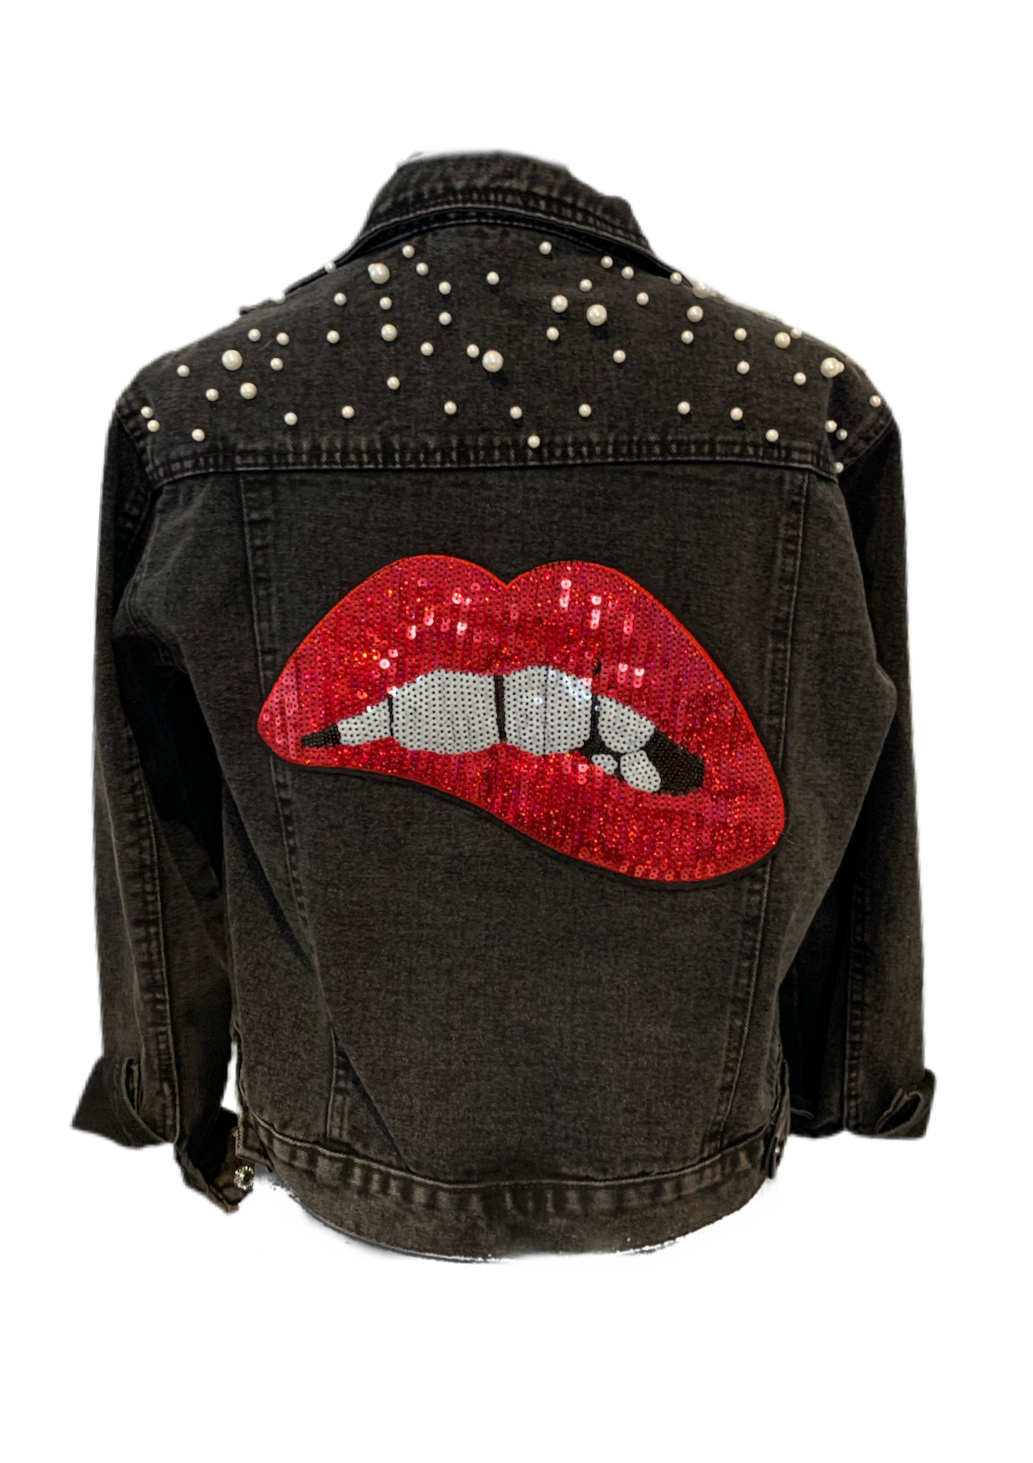 Black Jean Jacket  with Red Lips and pearls